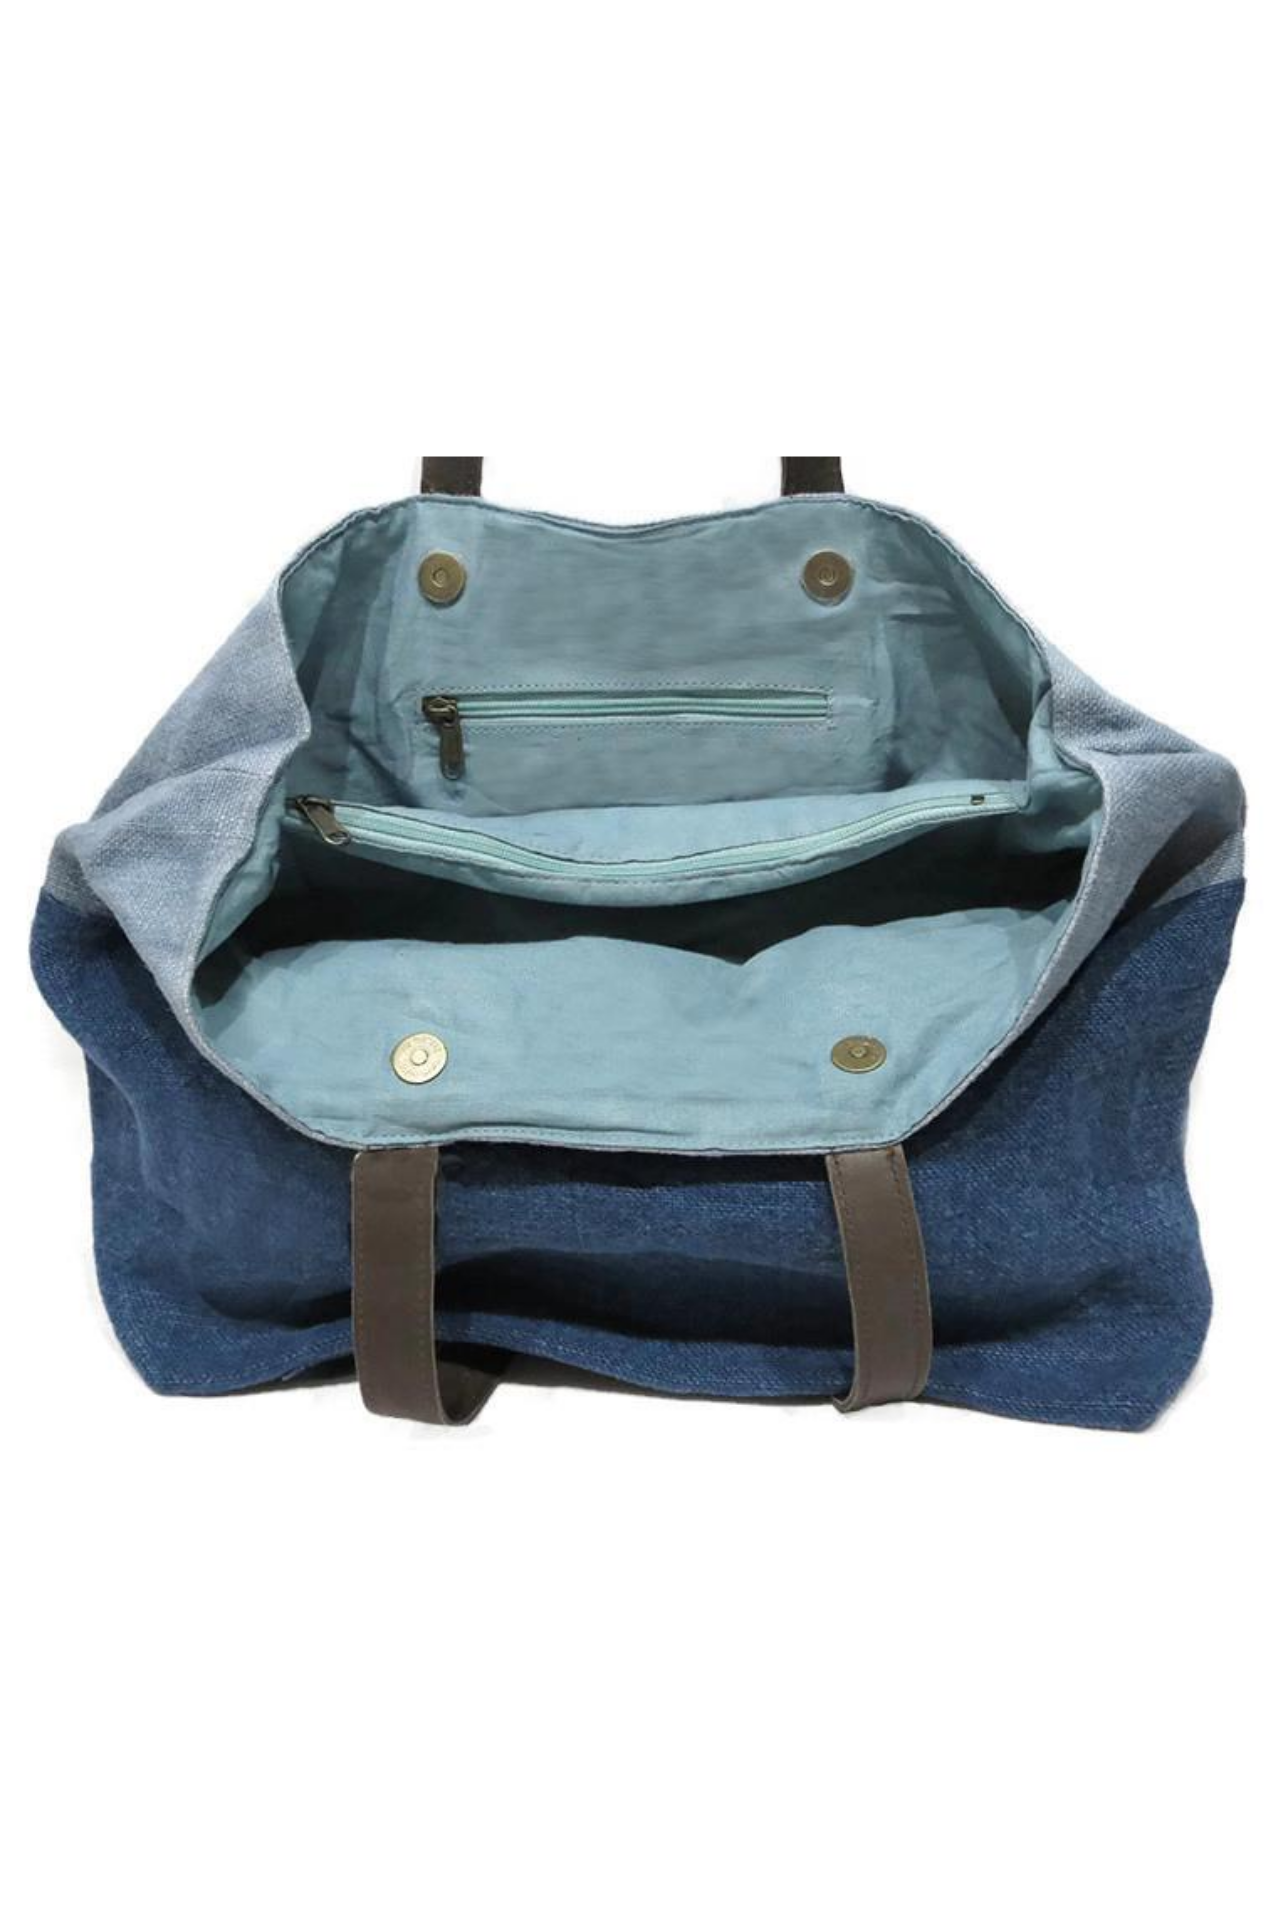 The thick light blue cotton lining of the double denim jute shoulder bag. The inside is split into three sections, two open sections either side of a large zip pocket. four metal clasps sit where the straps connect to the bag to keep the bag secure and closed.